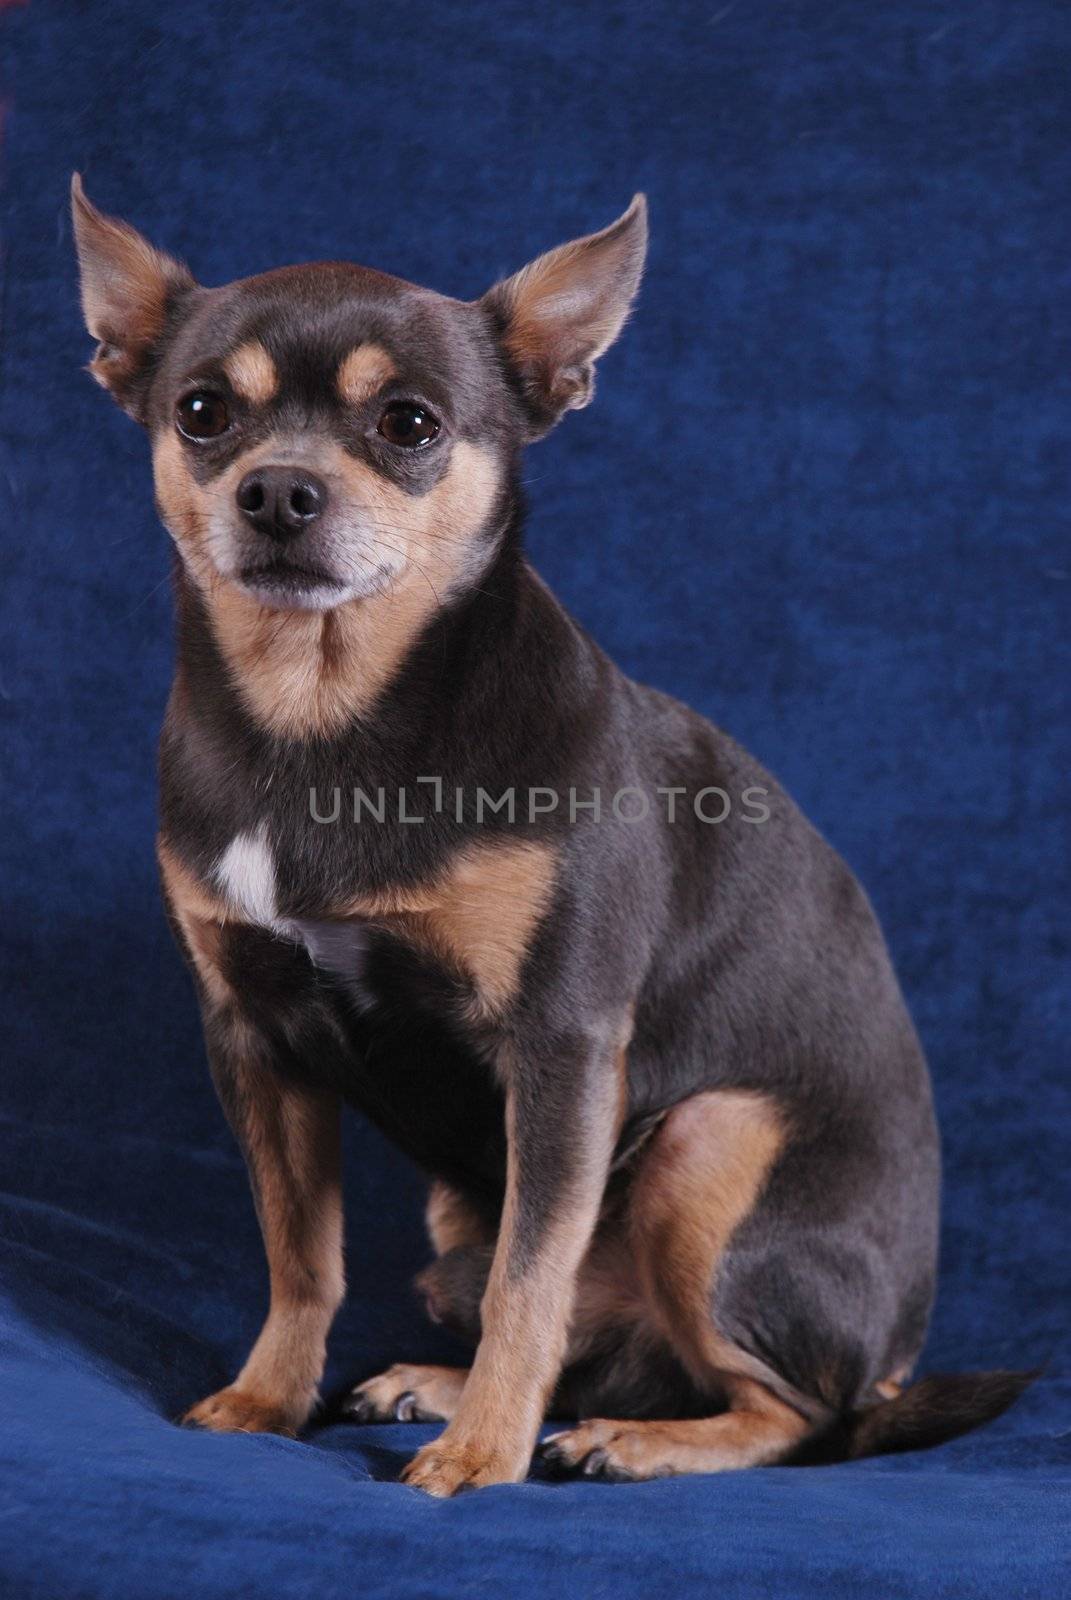 Chihuahua on blue by dnsphotography